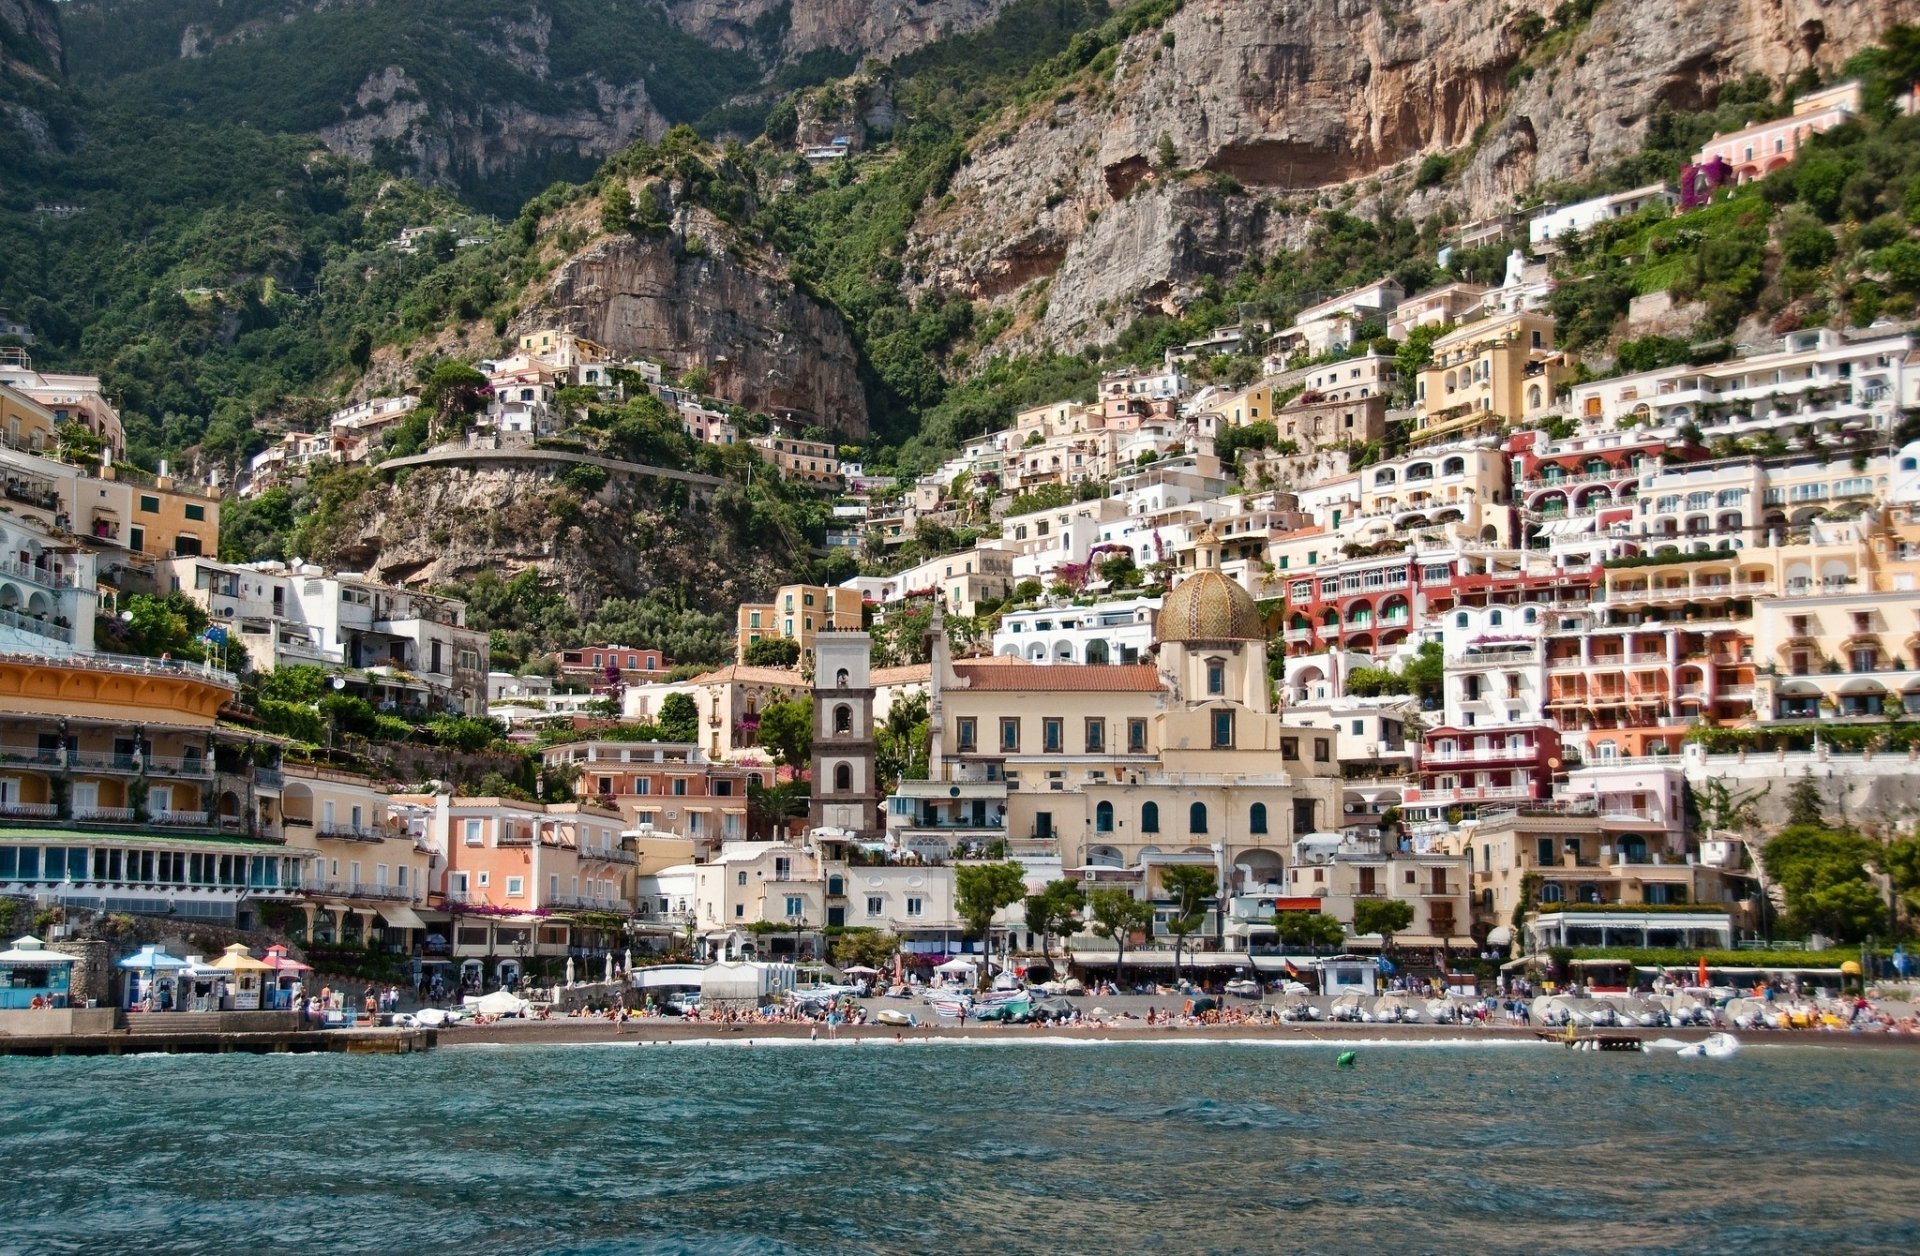 Positano Full HD Wallpaper and Background Image | 2048x1340 | ID:525284